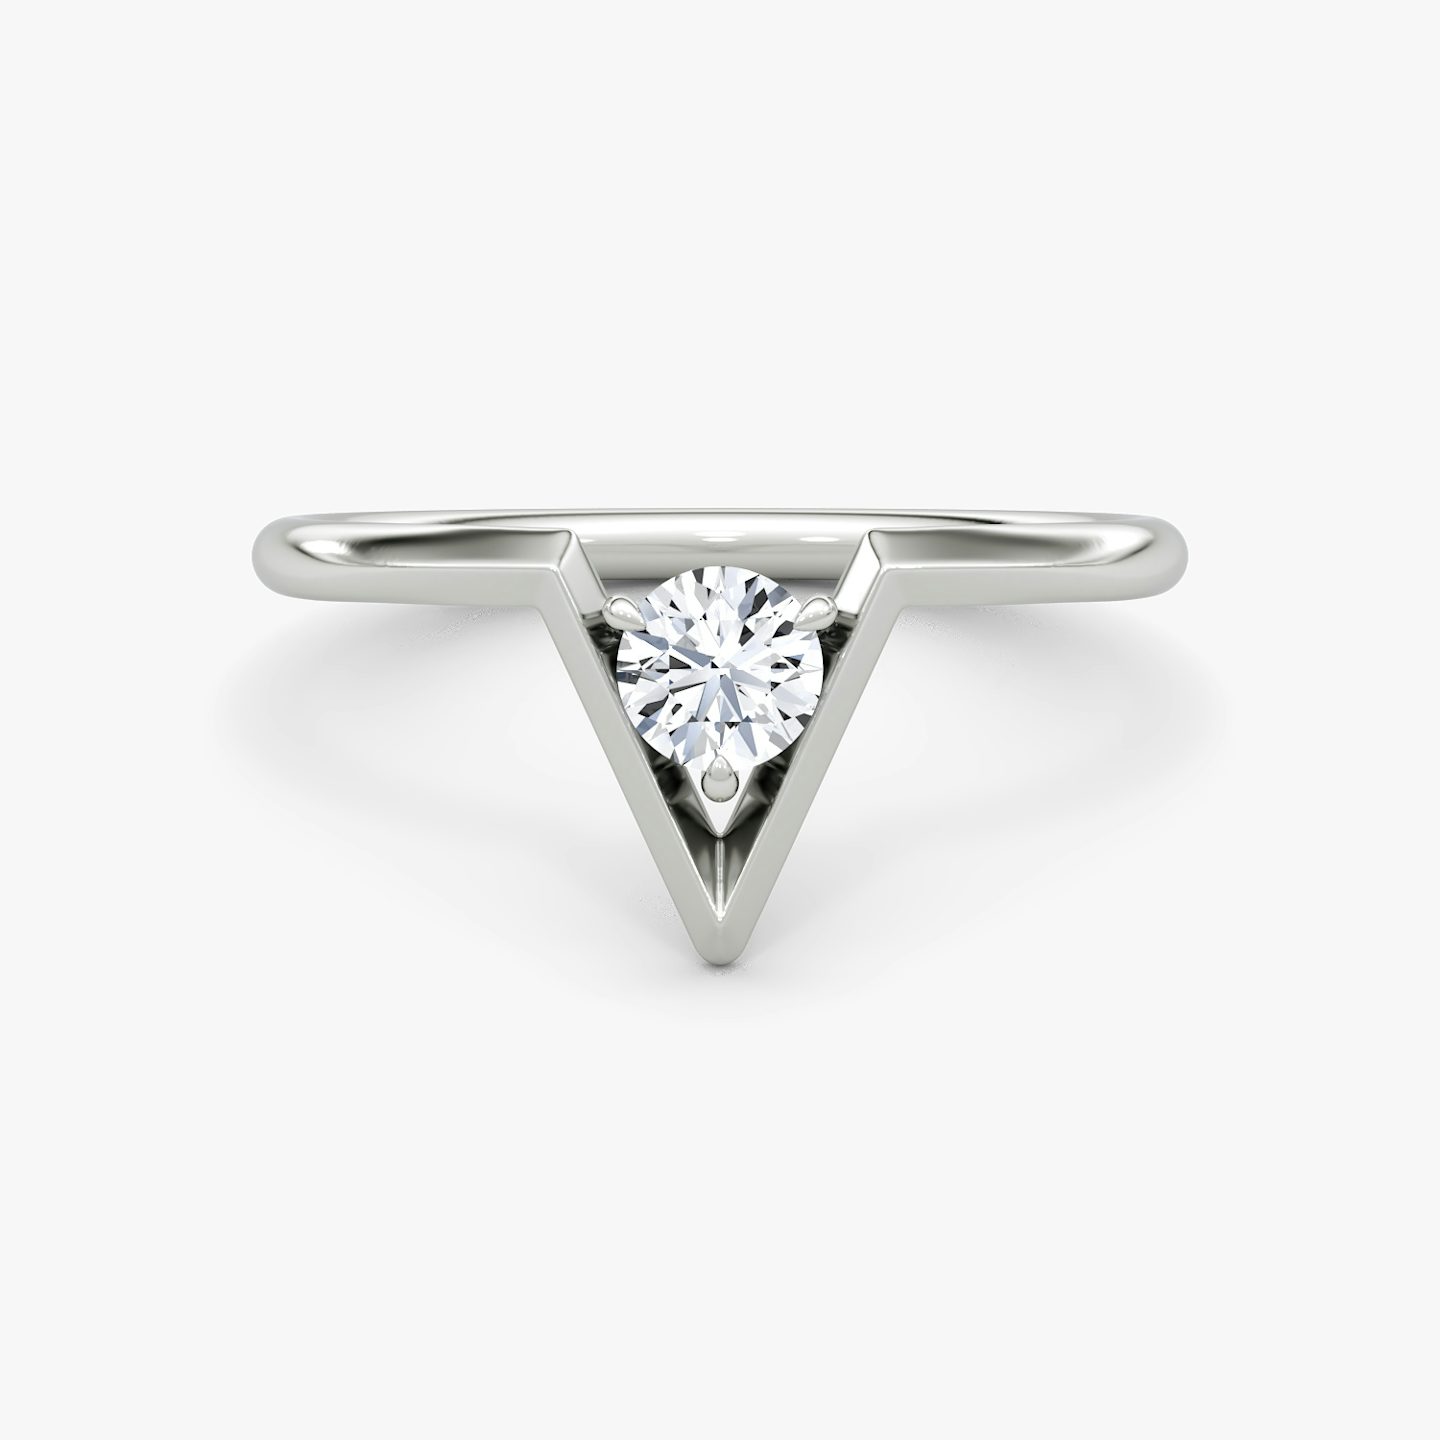 VRAI V Solitaire Ring | Round Brilliant | Sterling Silver | Carat weight: 1/4